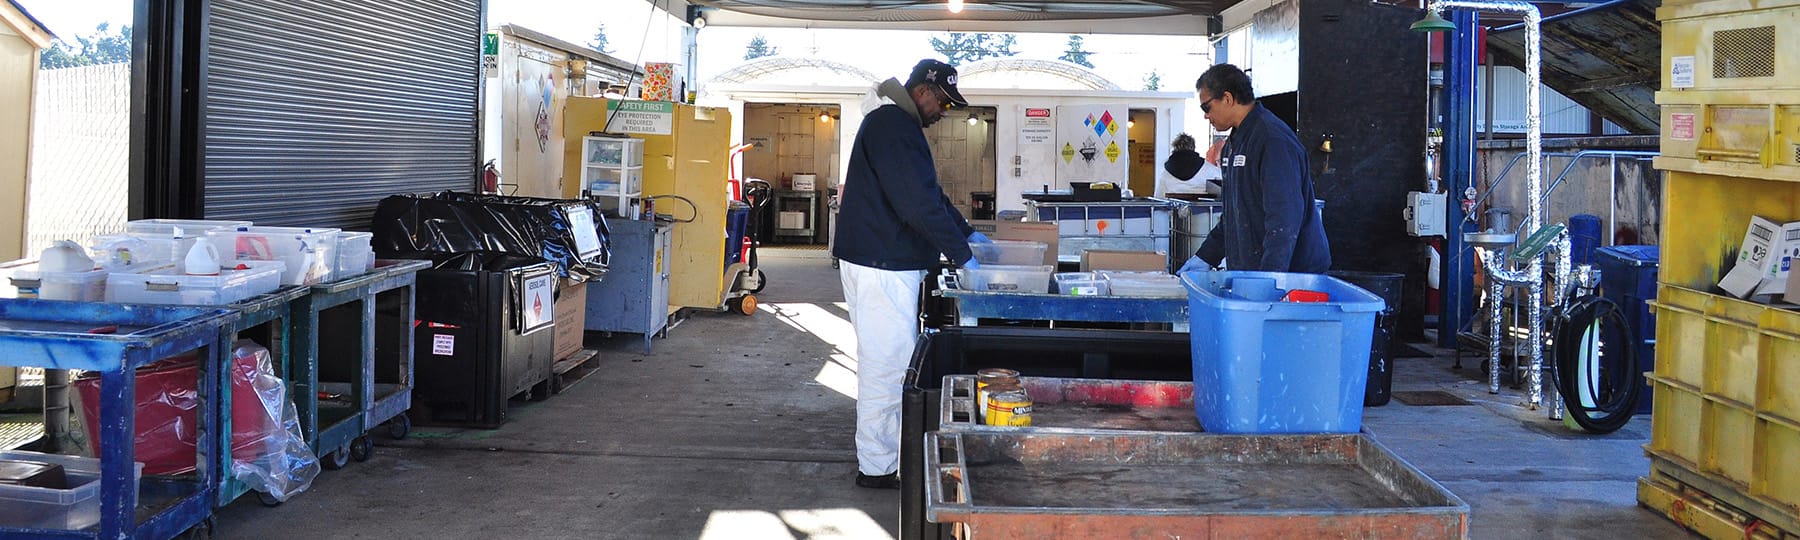 Two men stand at a household hazardous waste collection facility sorting materials.